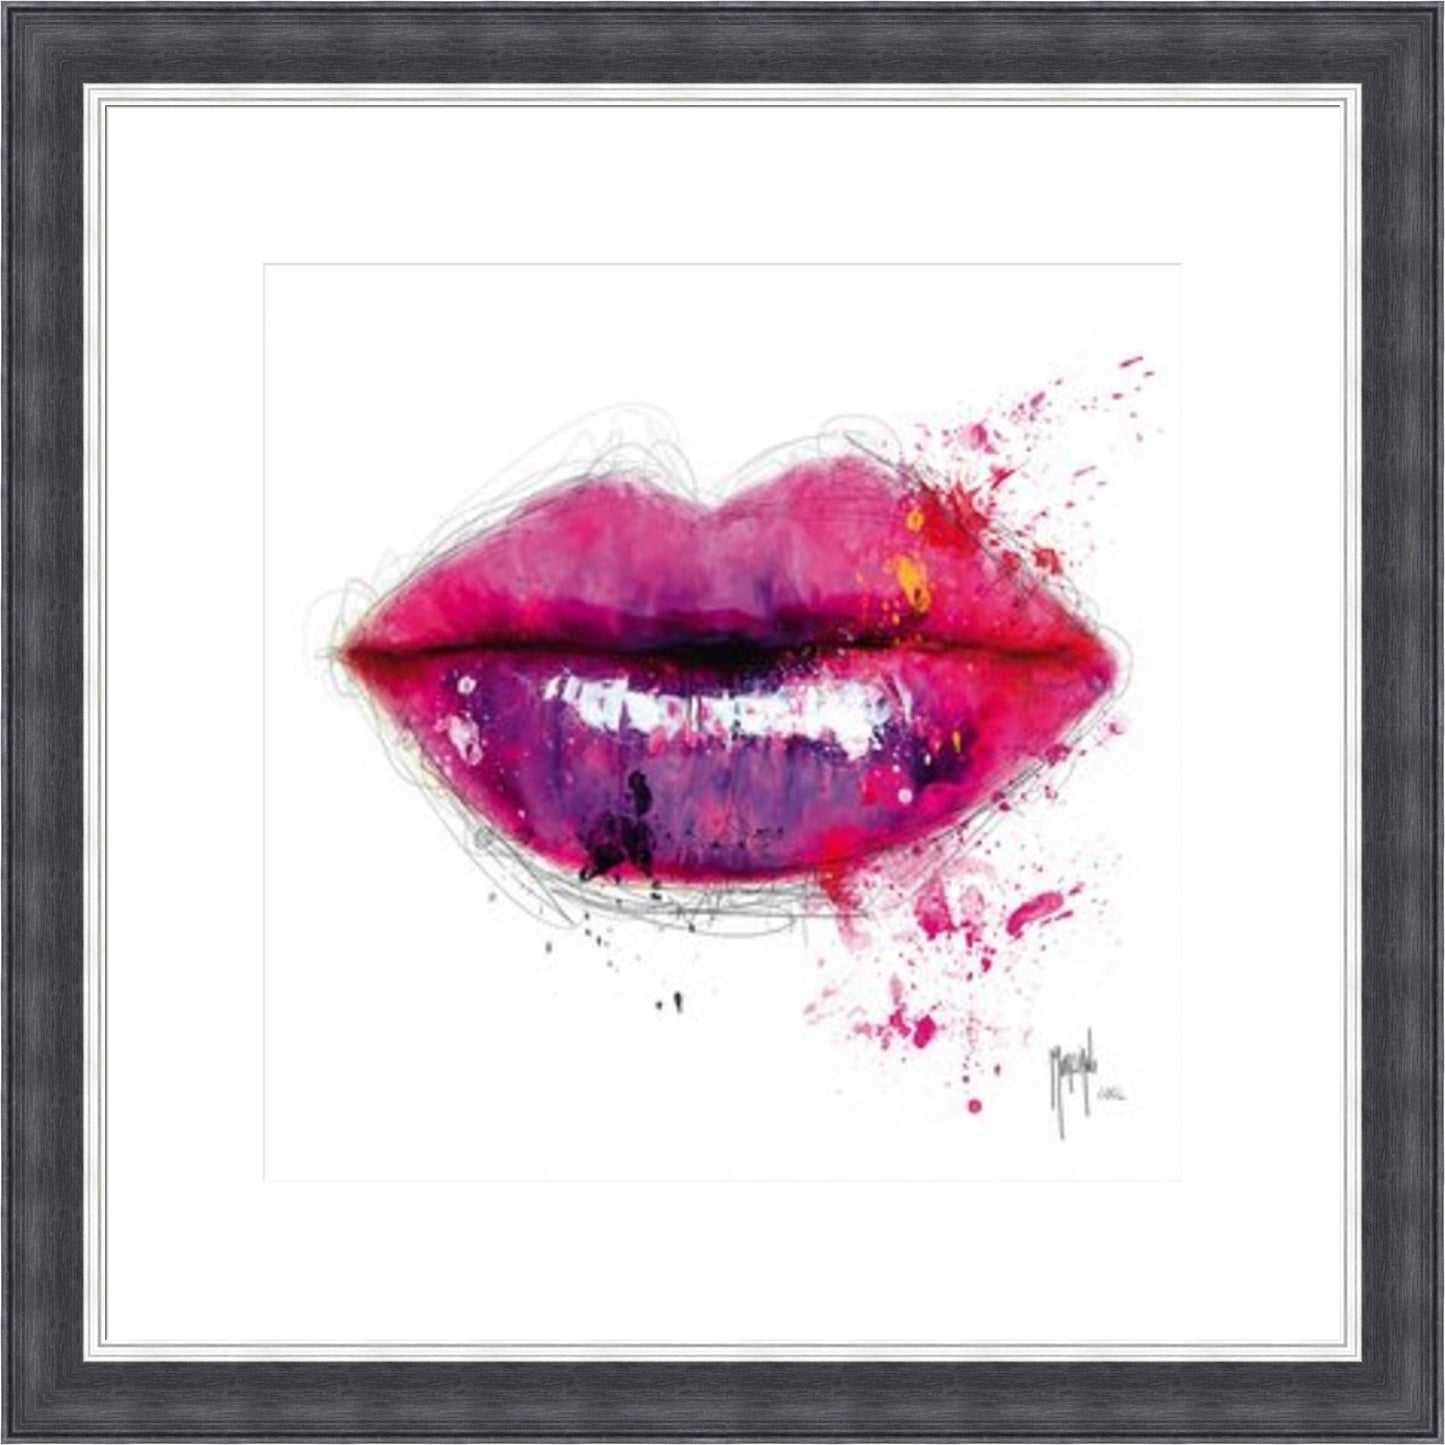 Colour of Kiss by Patrice Murciano